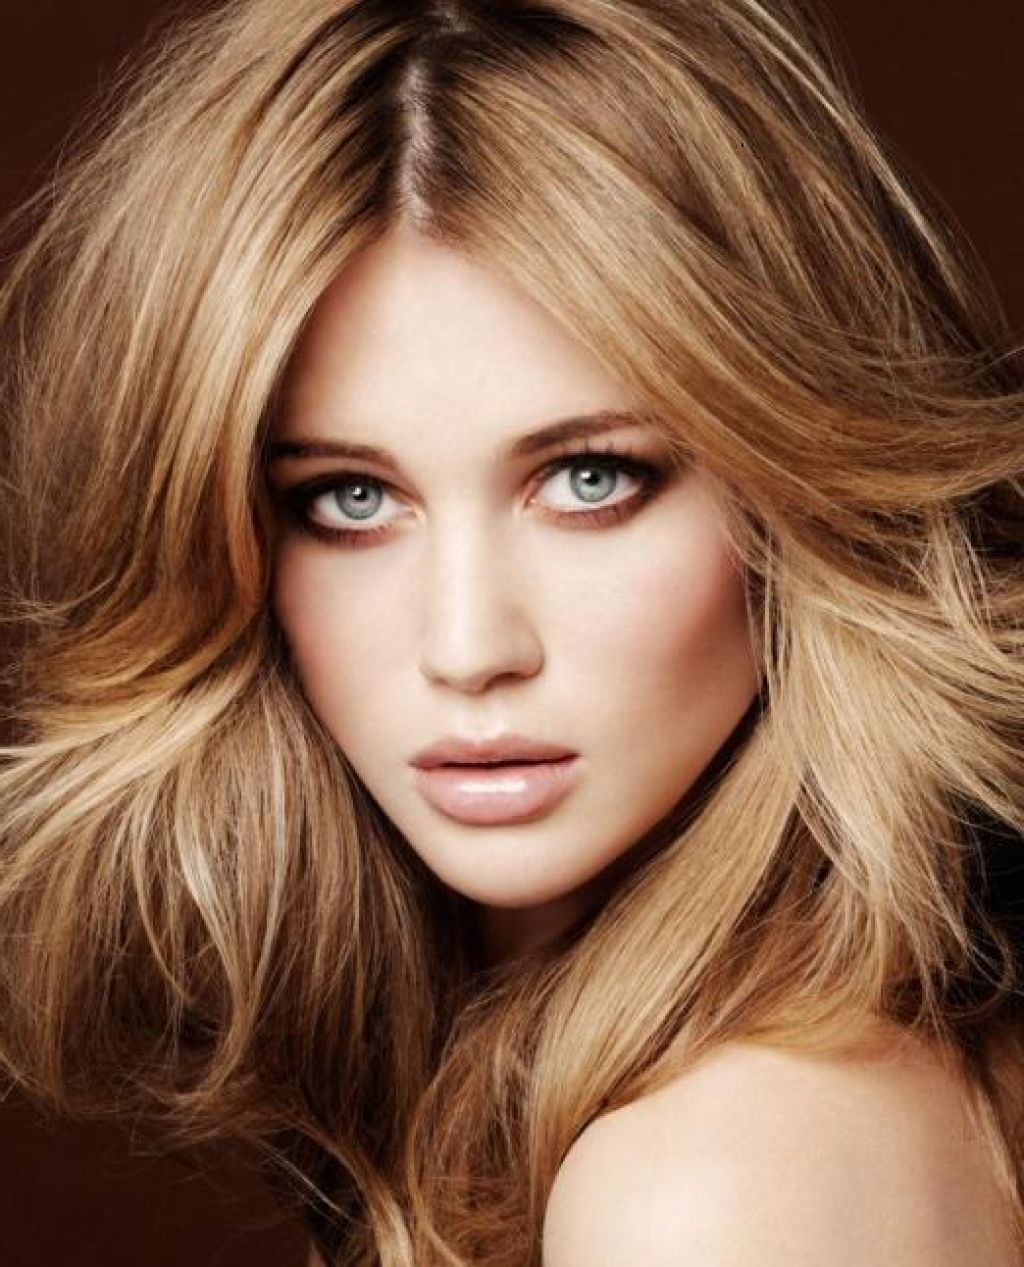 Best Makeup For Green Eyes And Blonde Hair Hair Color Cool Best Color For Brown Eyes Blonde Hair Popular Long